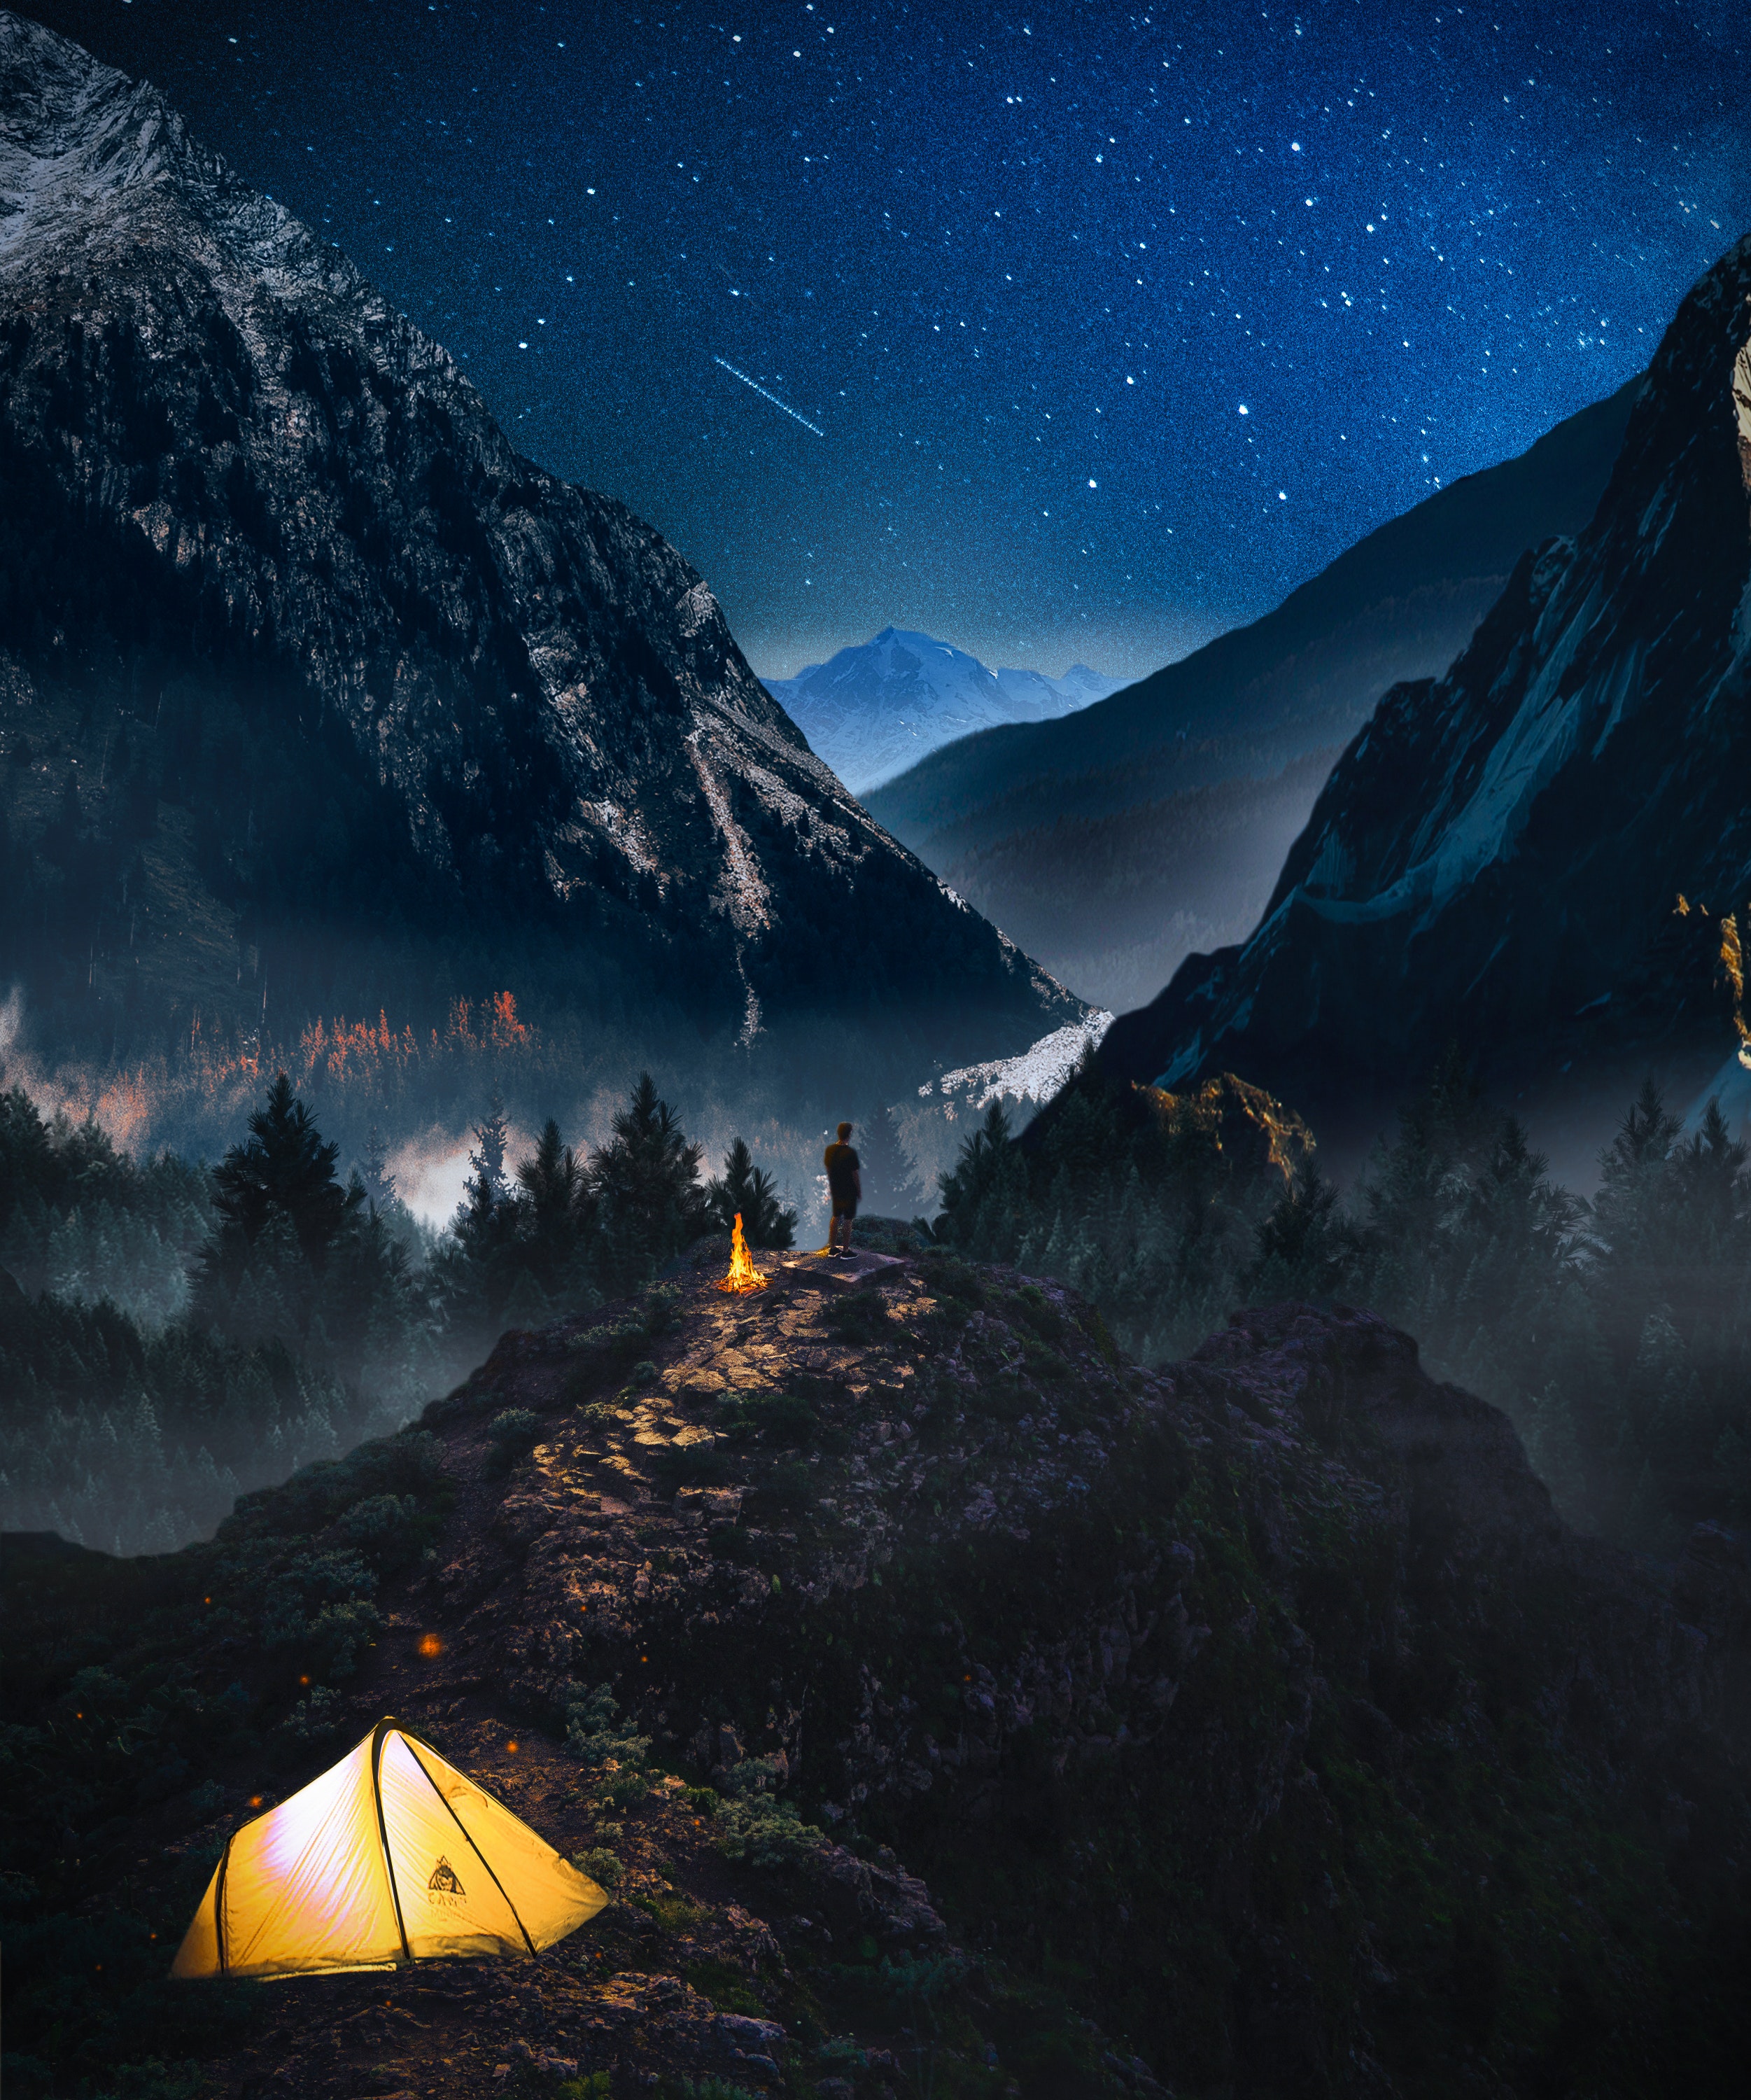 photoshop, starry sky, camping, campsite, loneliness, mountains, nature